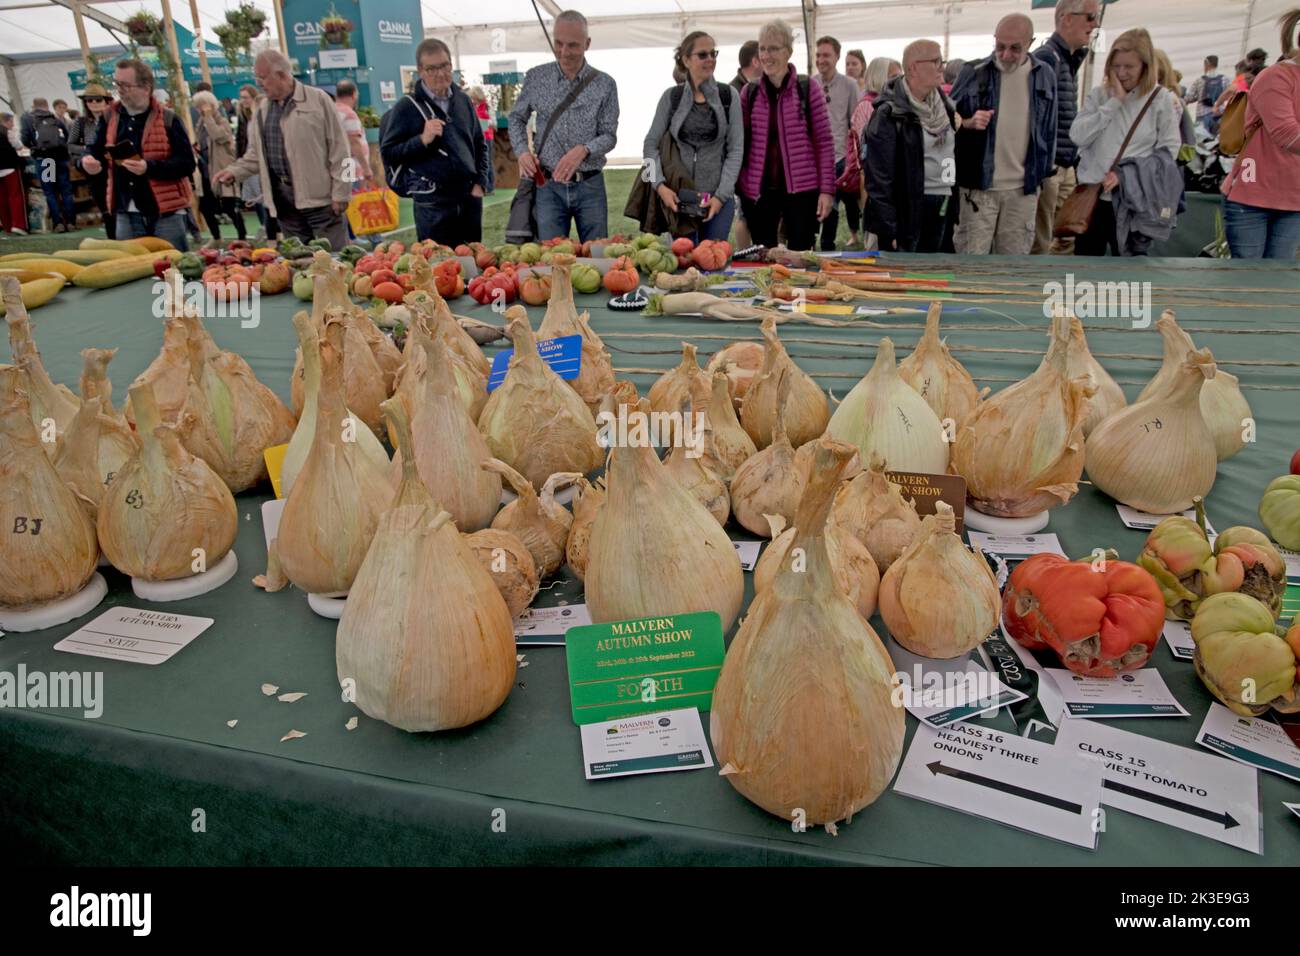 Giant onions some of the giant vegetables at Three Counties Autumn Show  Great Malvern, UK Stock Photo